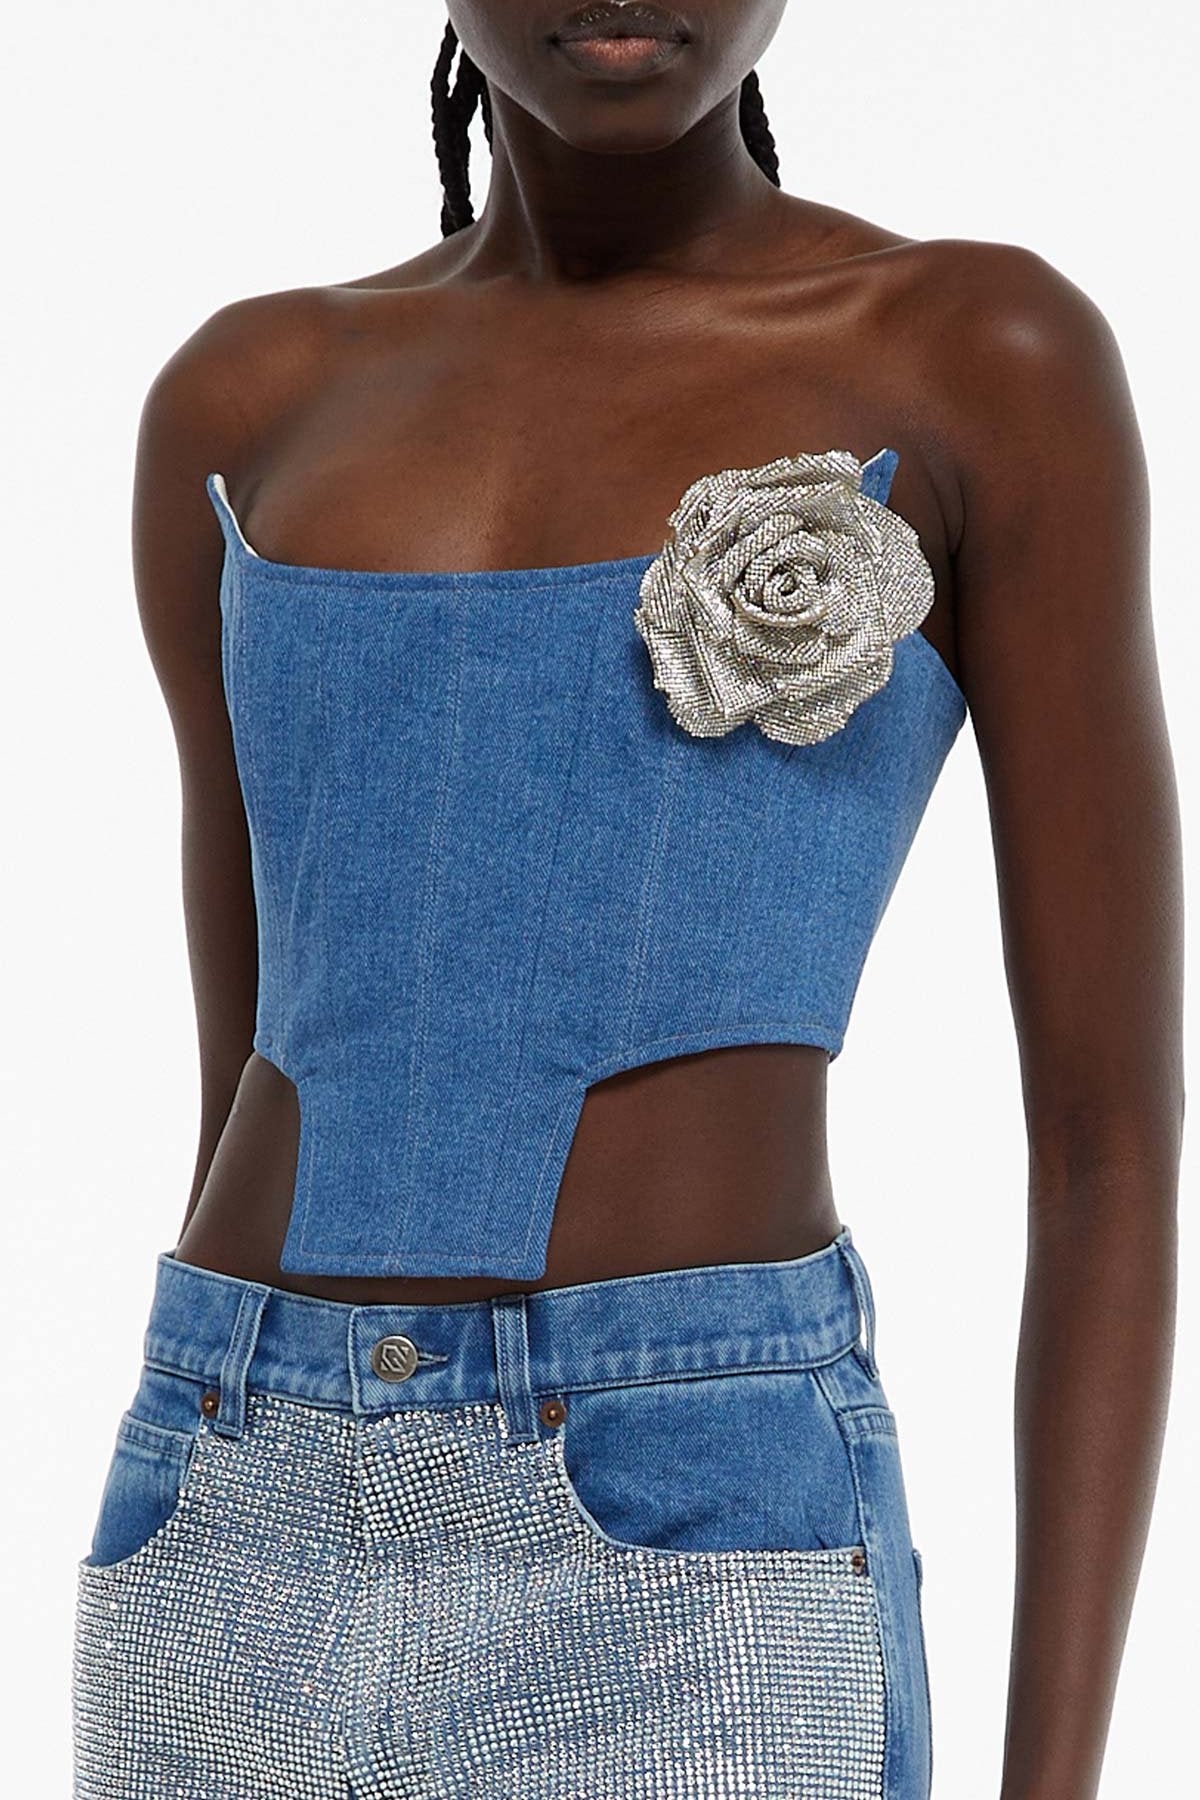 Firefly Corset in Denim with Crystals Pin in Light Blue Denim - shop-olivia.com